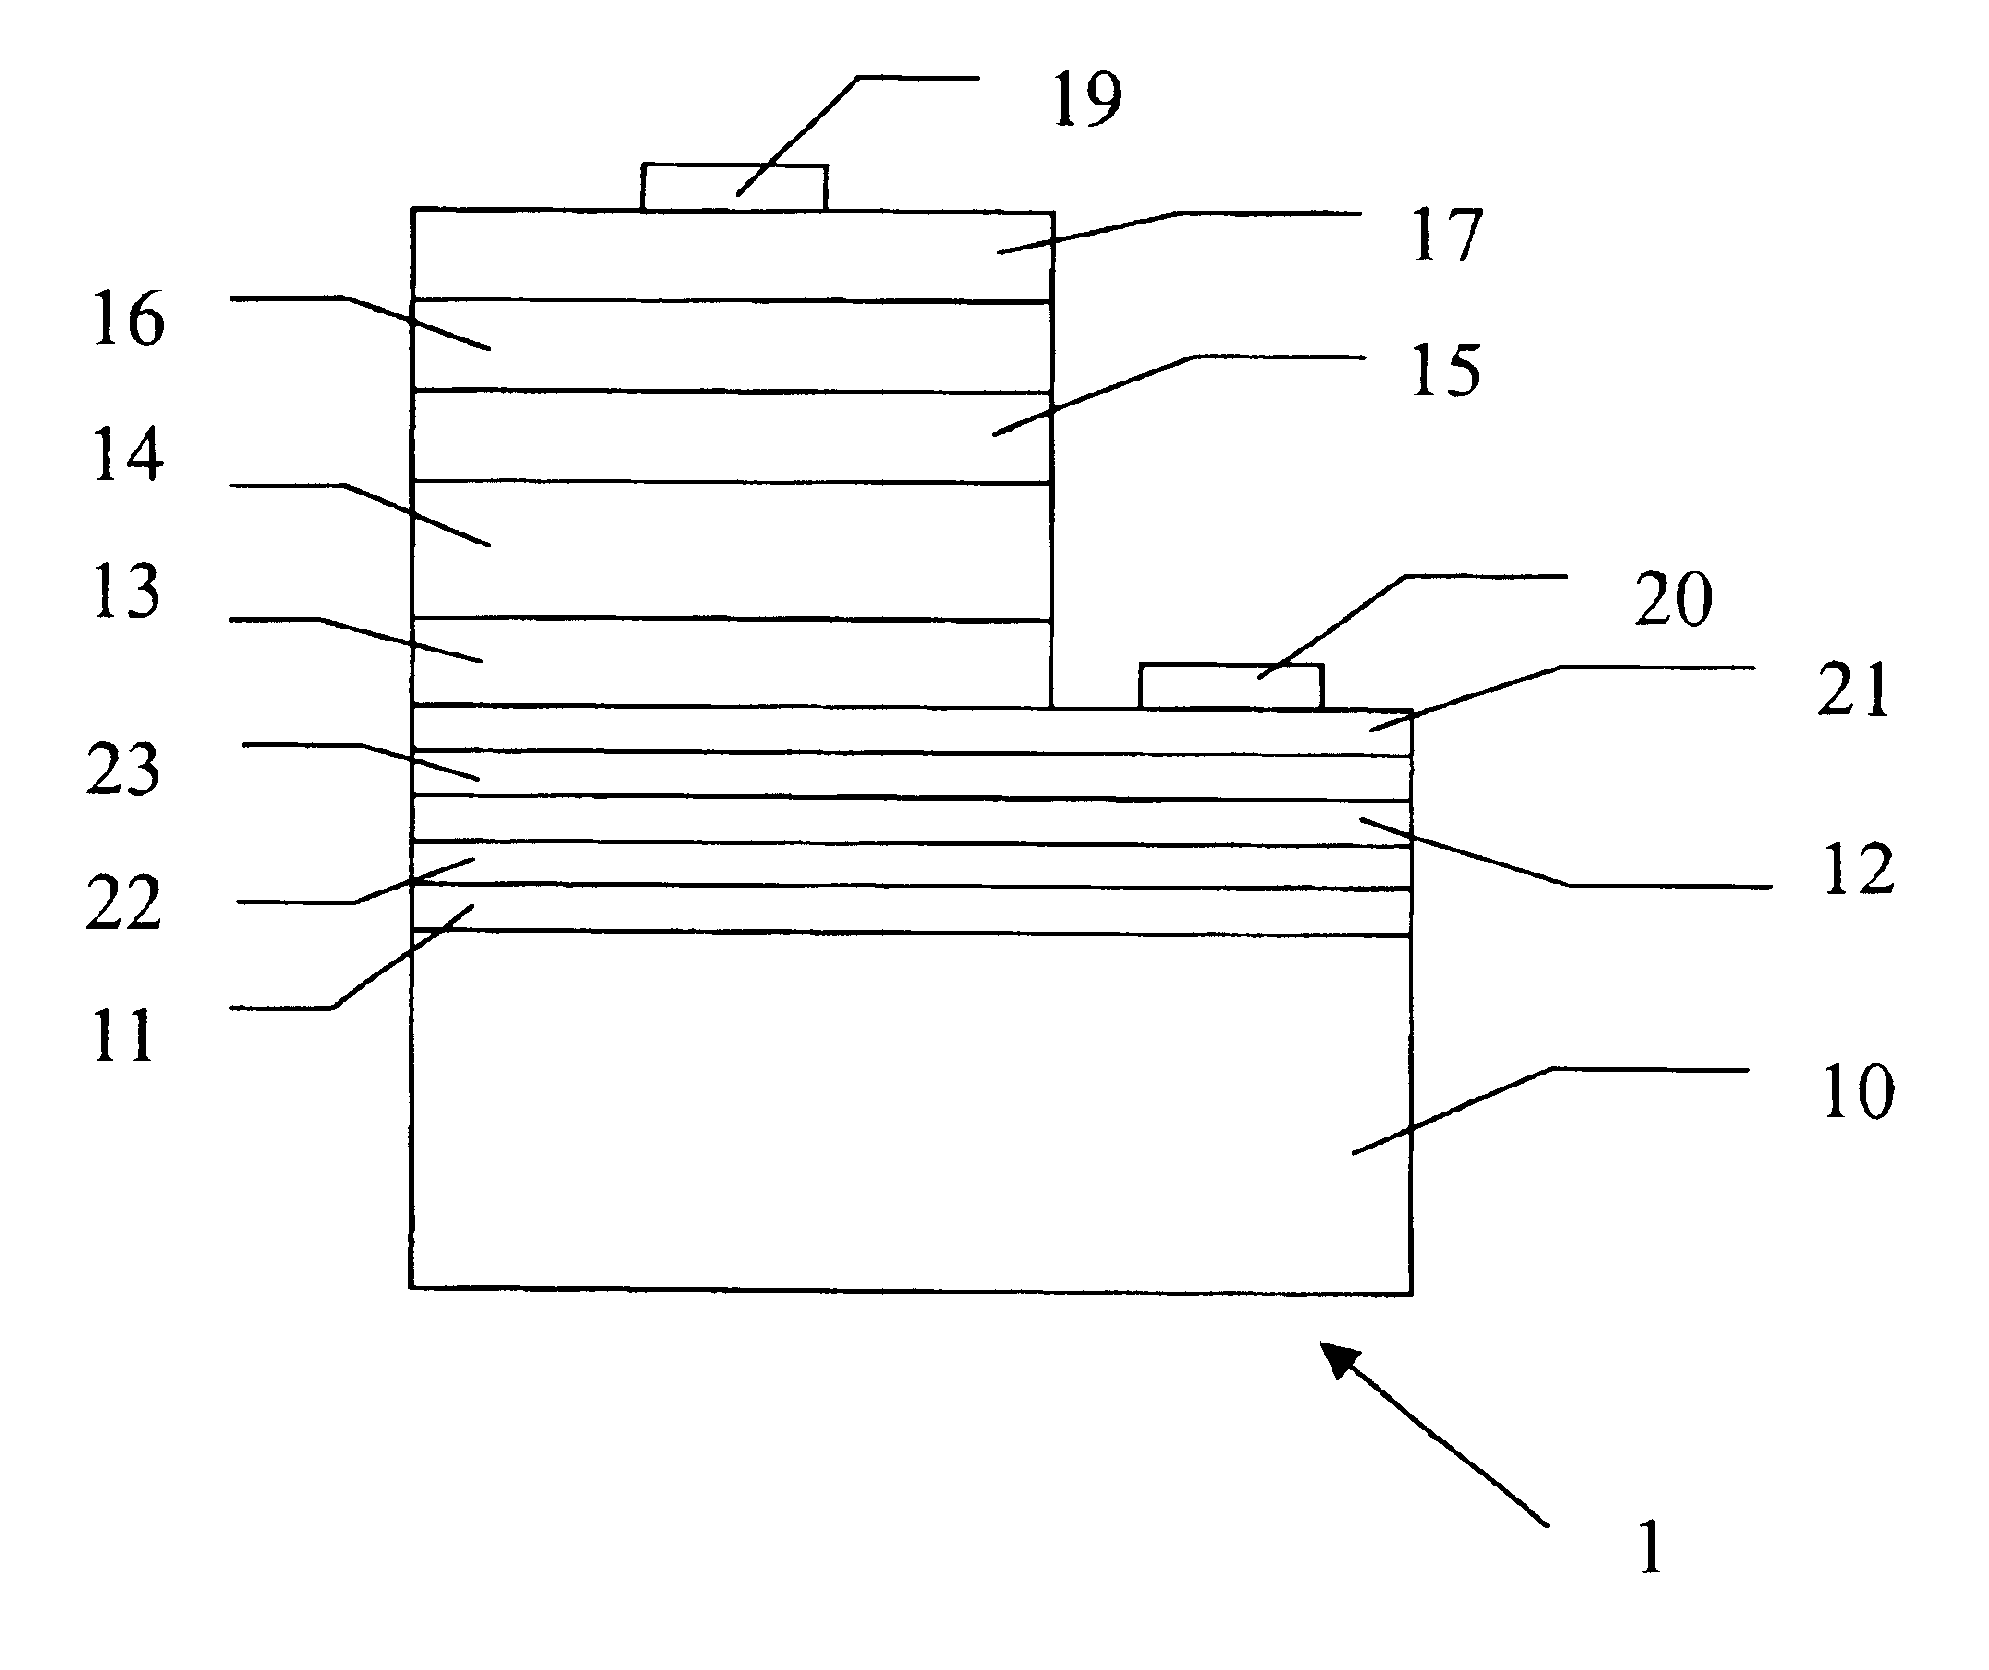 Light emitting diode having an adhesive layer and a reflective layer